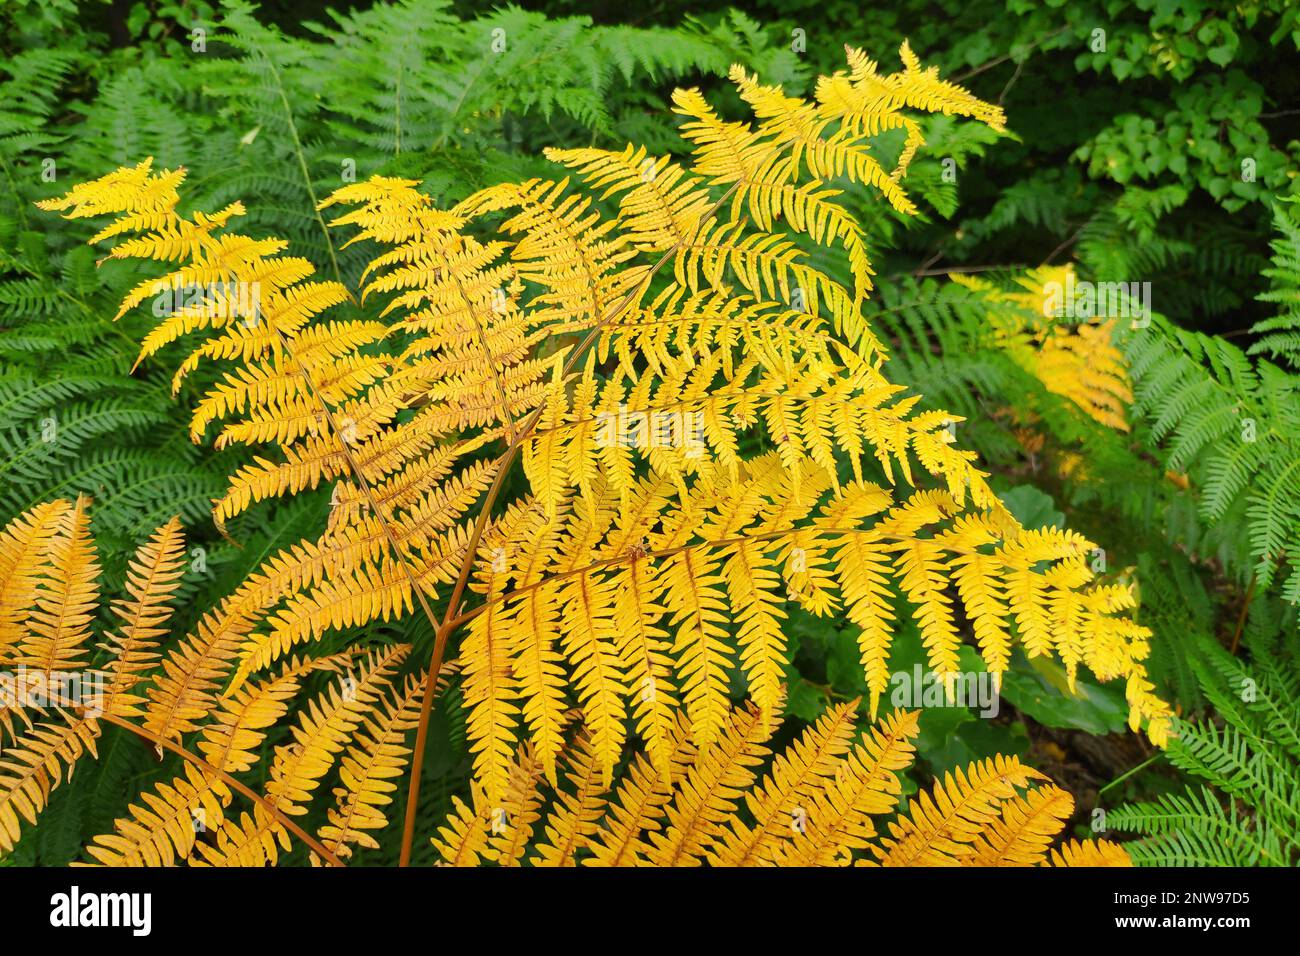 A fern (Polypodiopsida or Polypodiophyta) is a member of a group of vascular plants (plants with xylem and phloem) that reproduce via spores and have Stock Photo